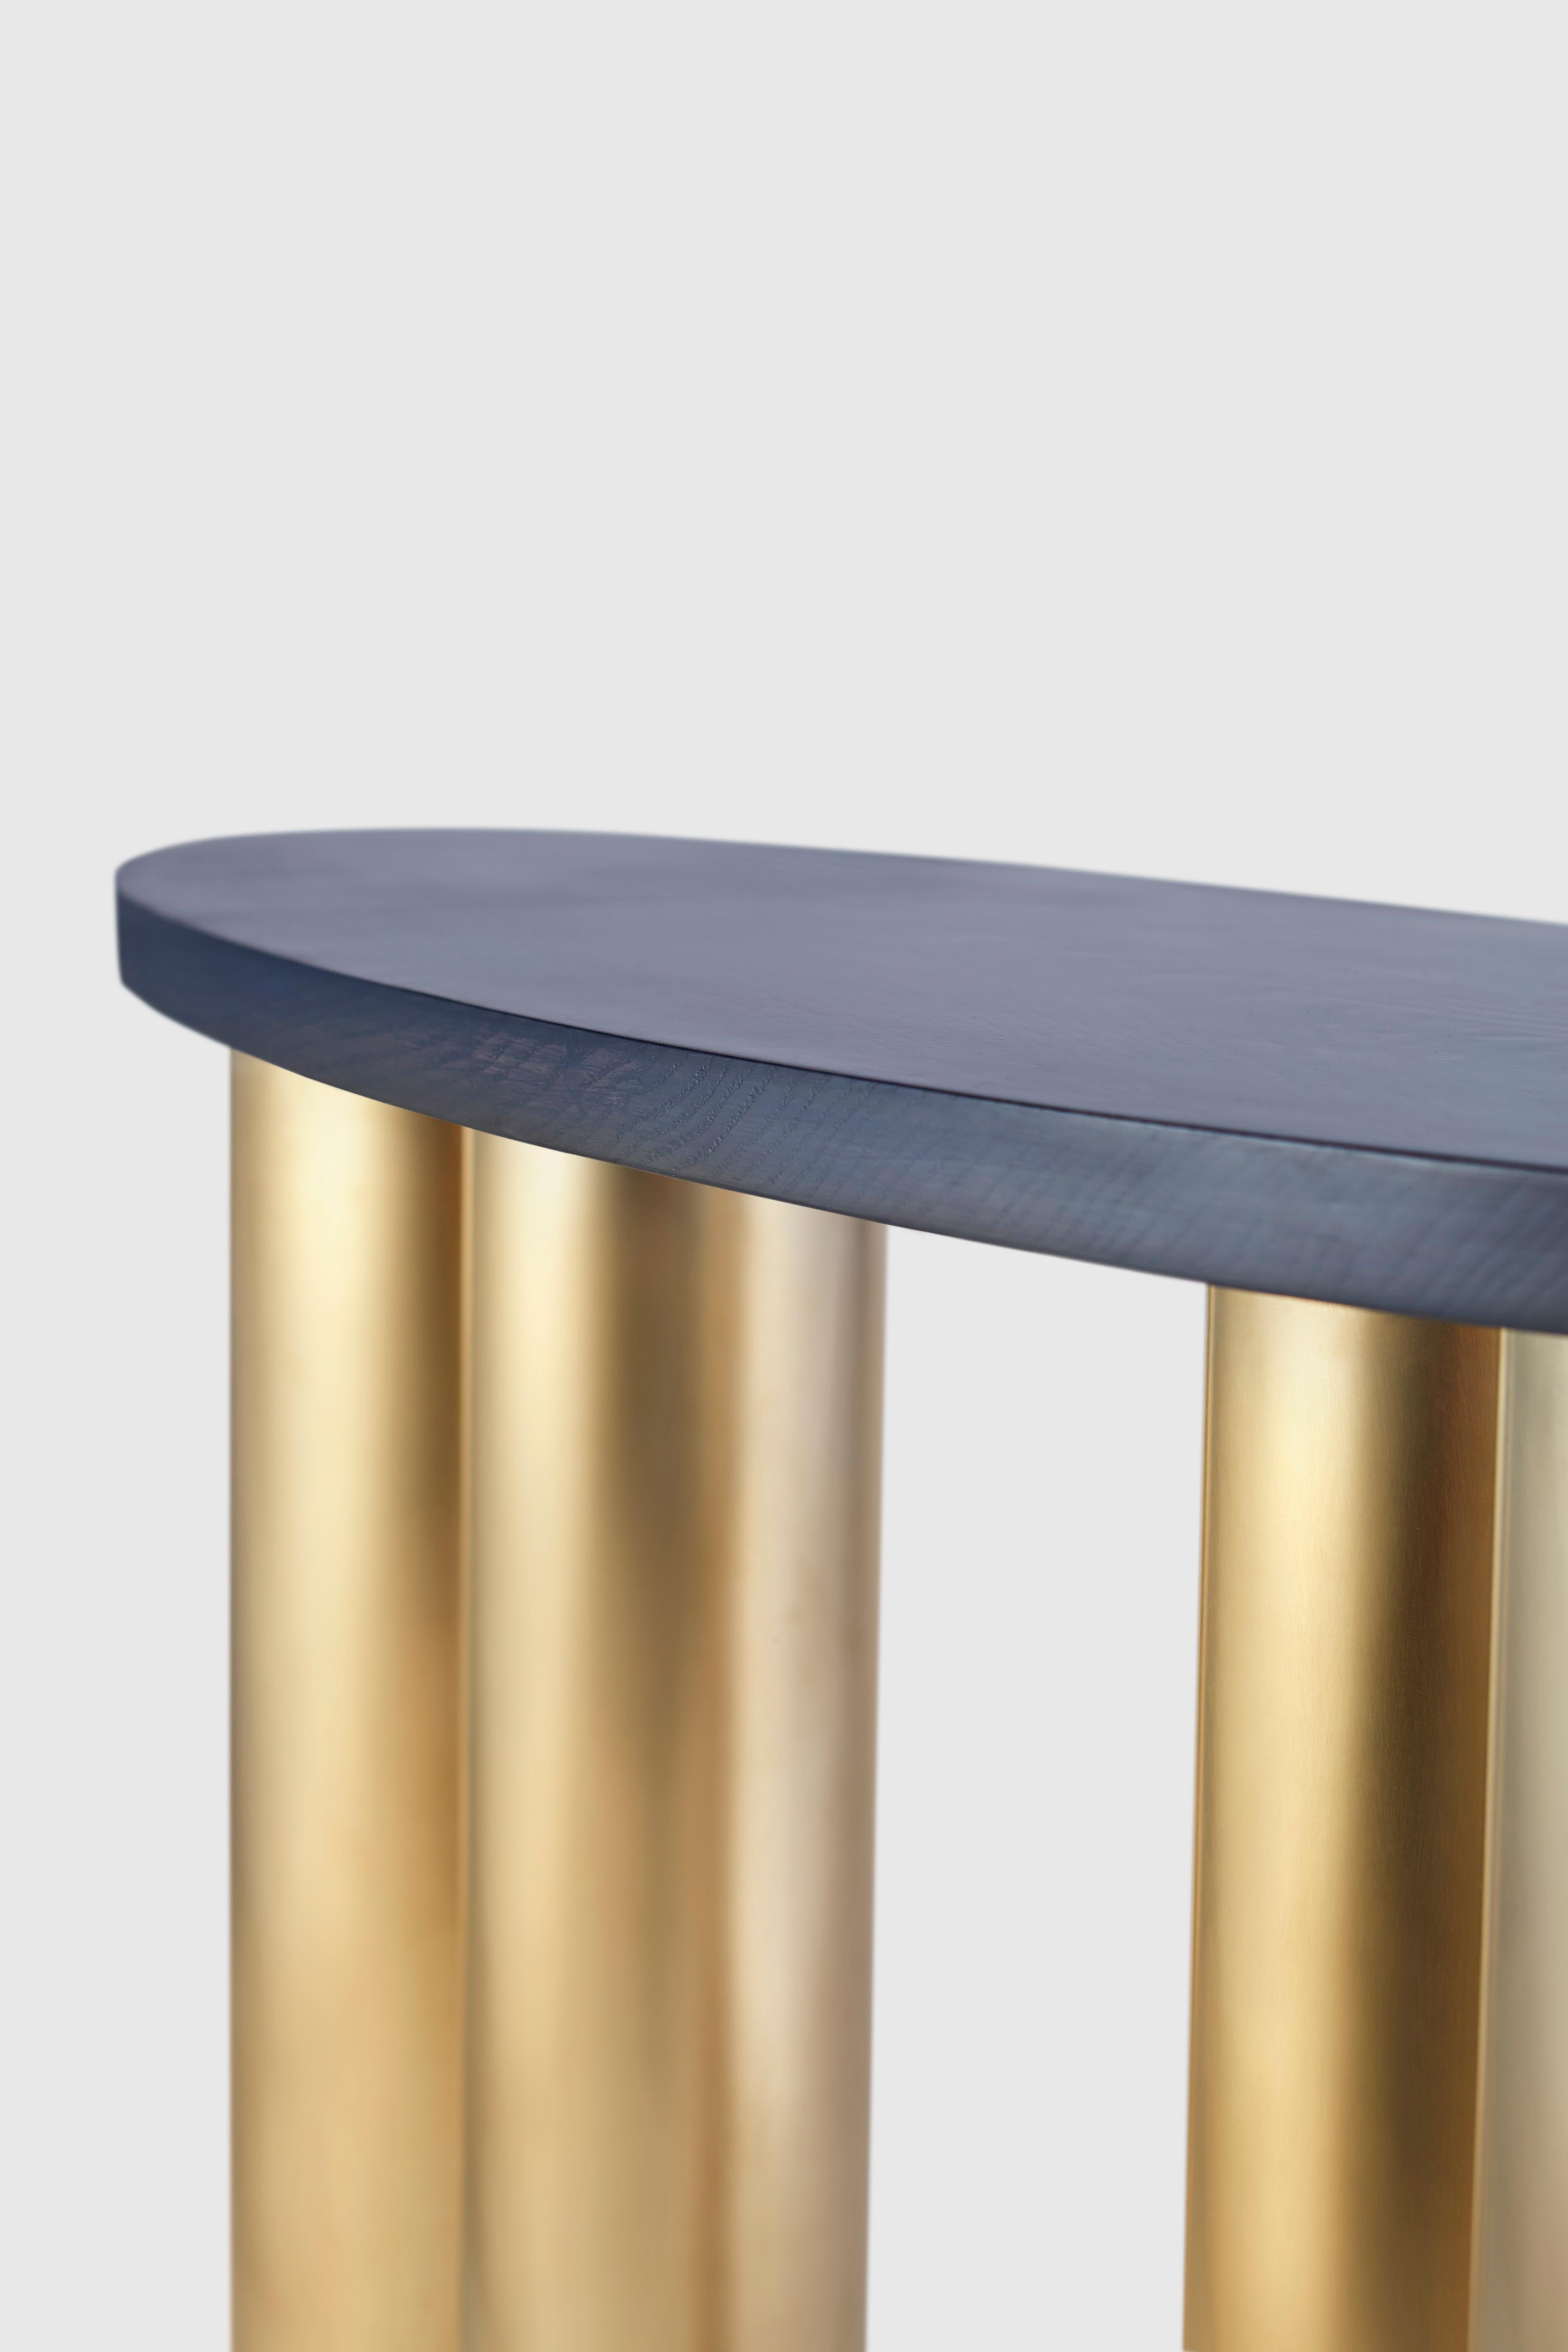 Modern Unique Bloom Table Gold by Hatsu